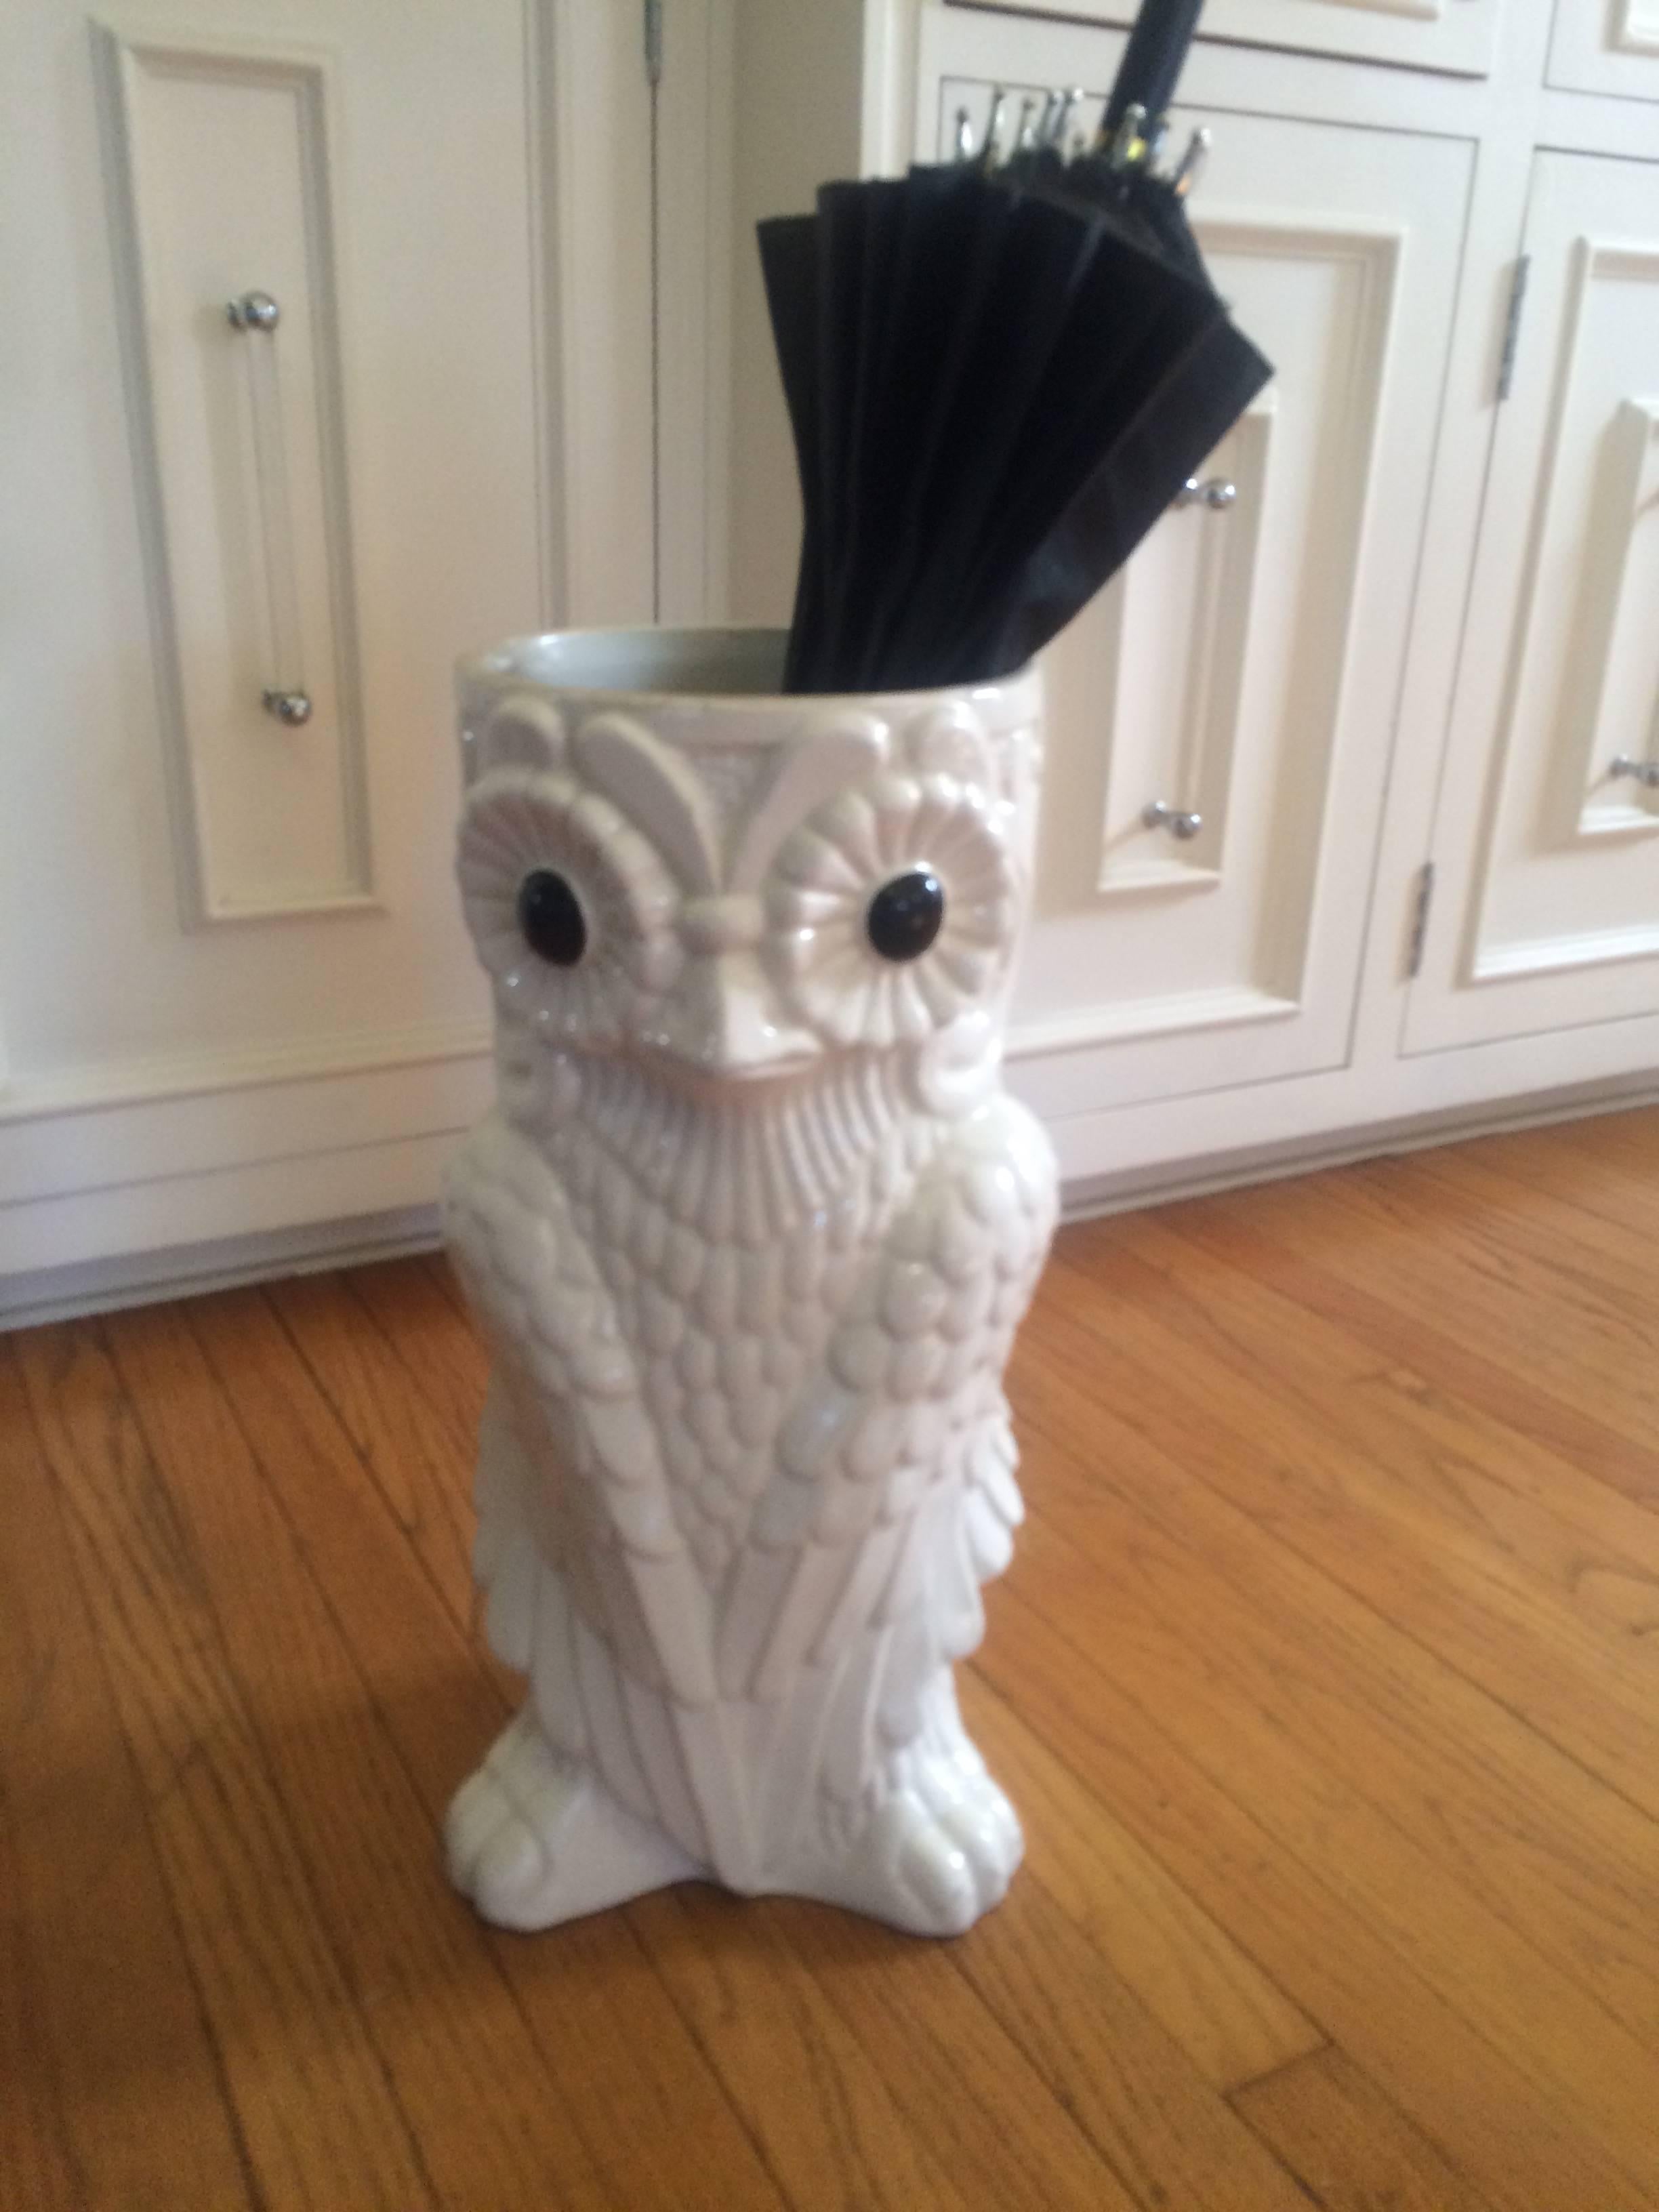 Whether you live in a cabin or a Park Avenue town house, our Italian owl umbrella stand will keep your umbrellas cleverly contained in any storm. The owl brings vision and good luck to any space with his Whimsical, yet sophisticated glance.